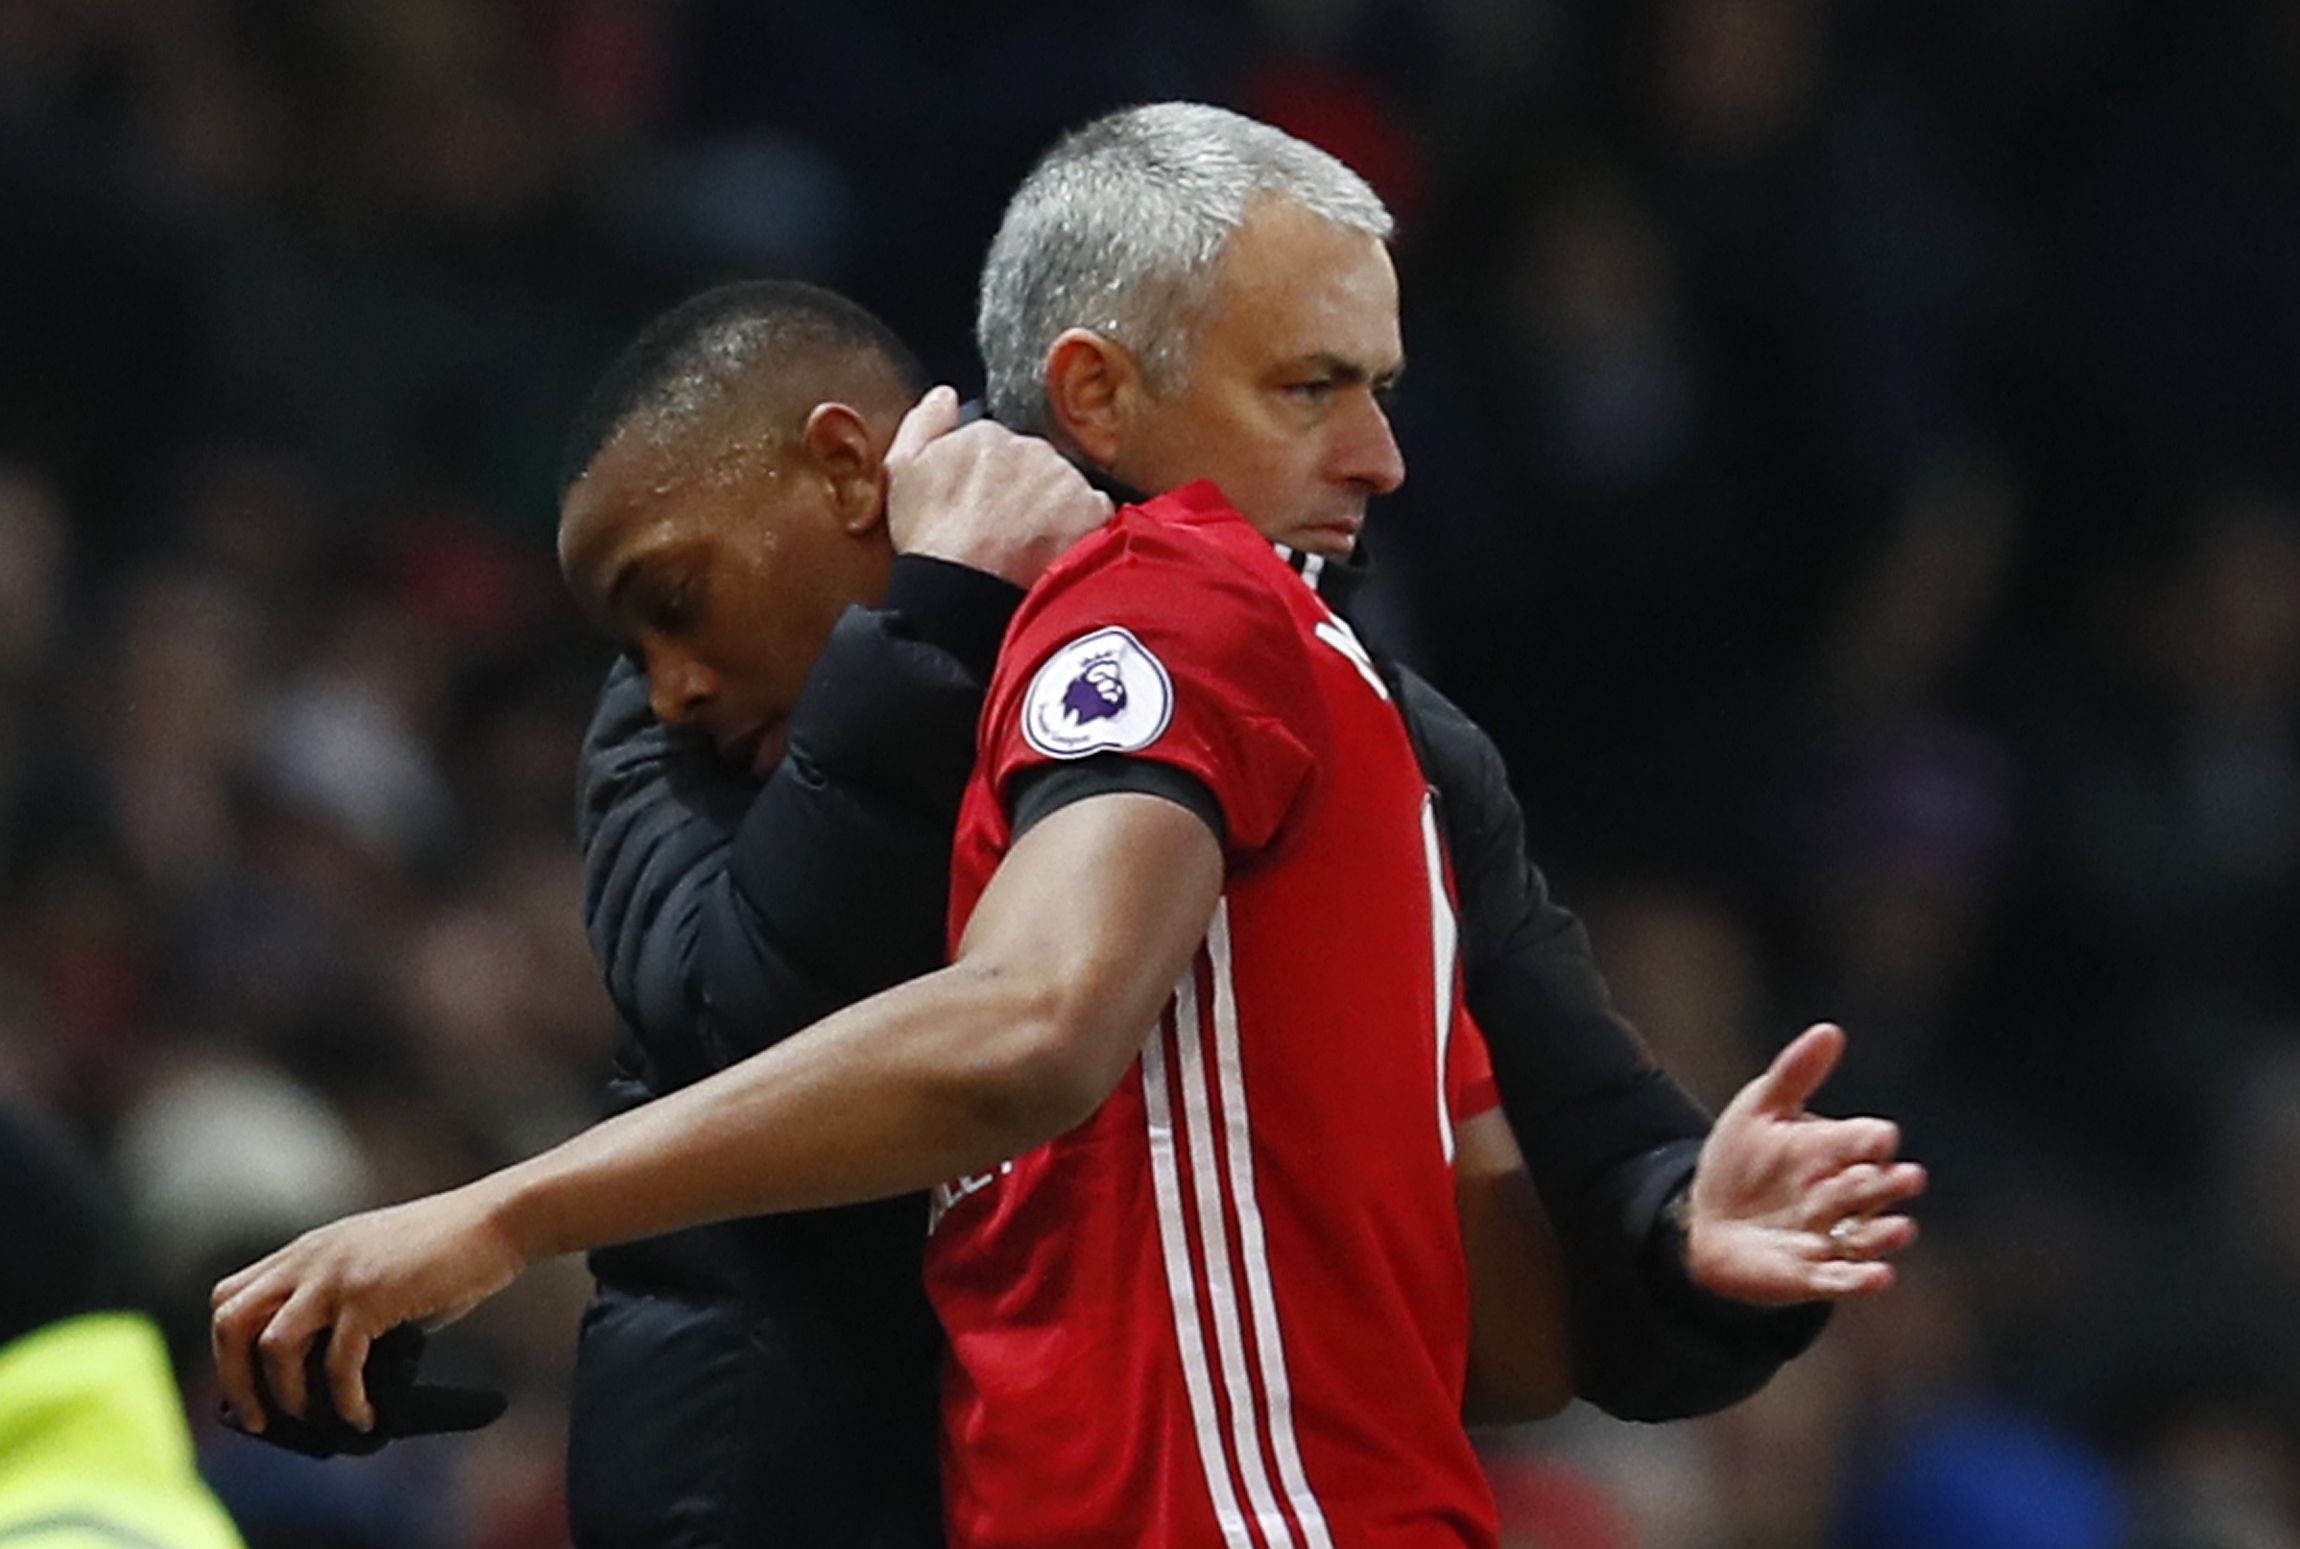 Manchester United Striker Anthony Martial Is Congratulated - Jose Mourinho Anthony Martial - HD Wallpaper 